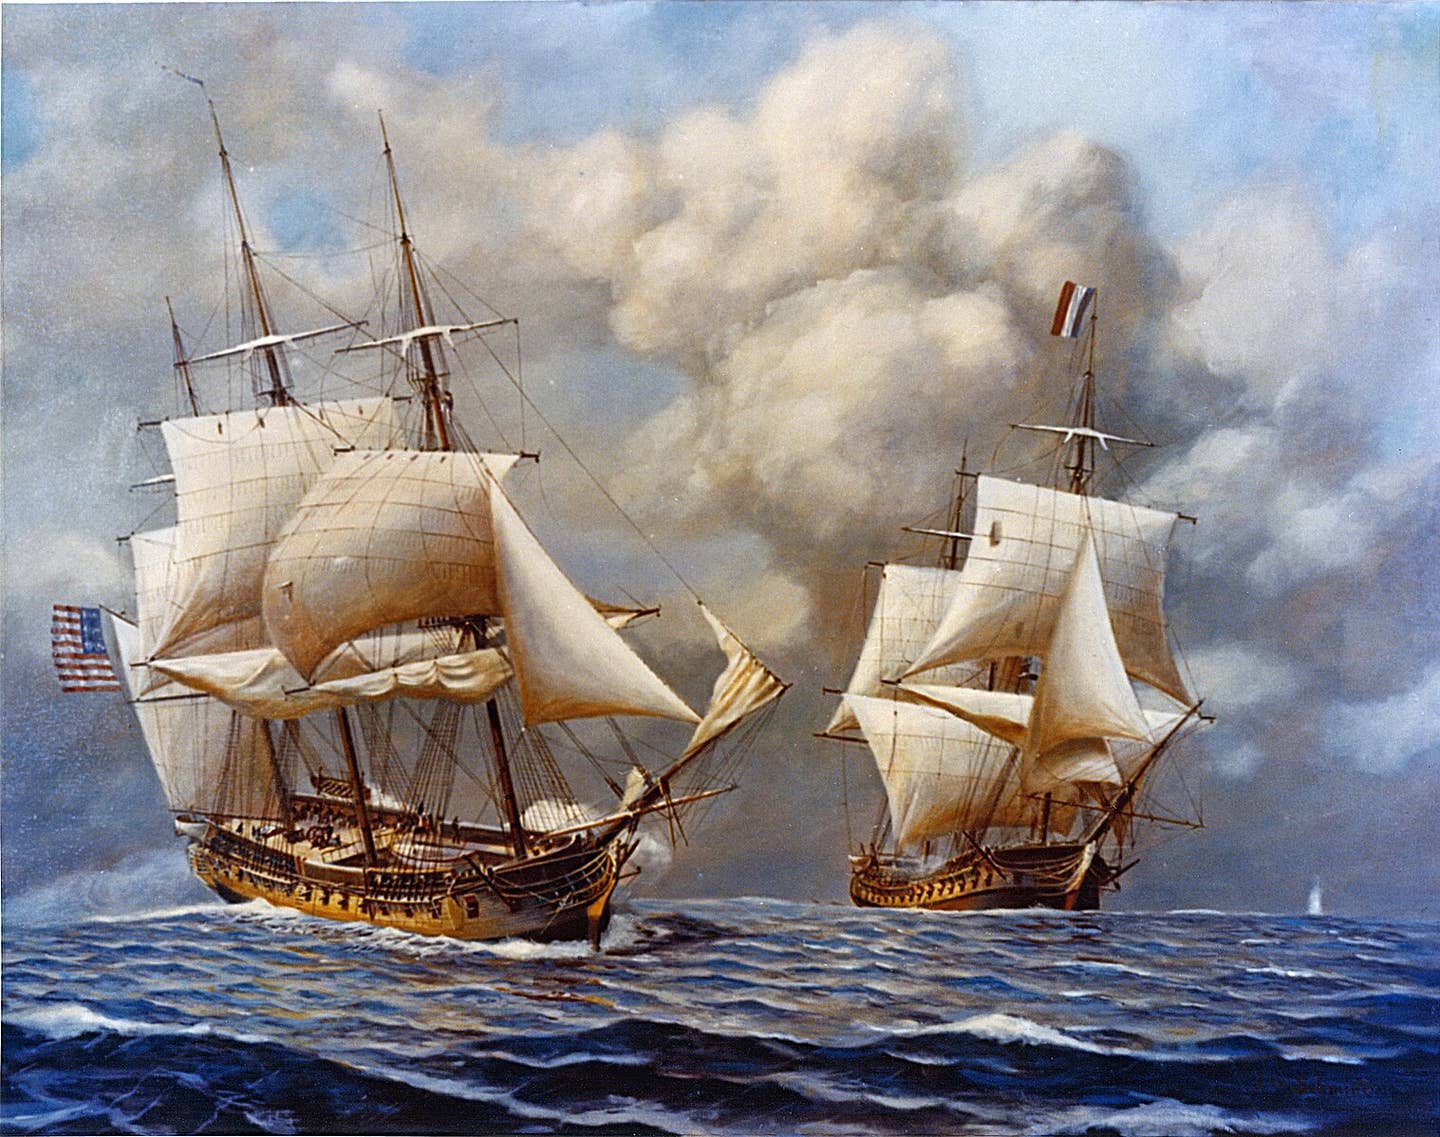 Scene depicting the engagement, with the USS Constellation (left), firing upon the L'Insurgente (right).